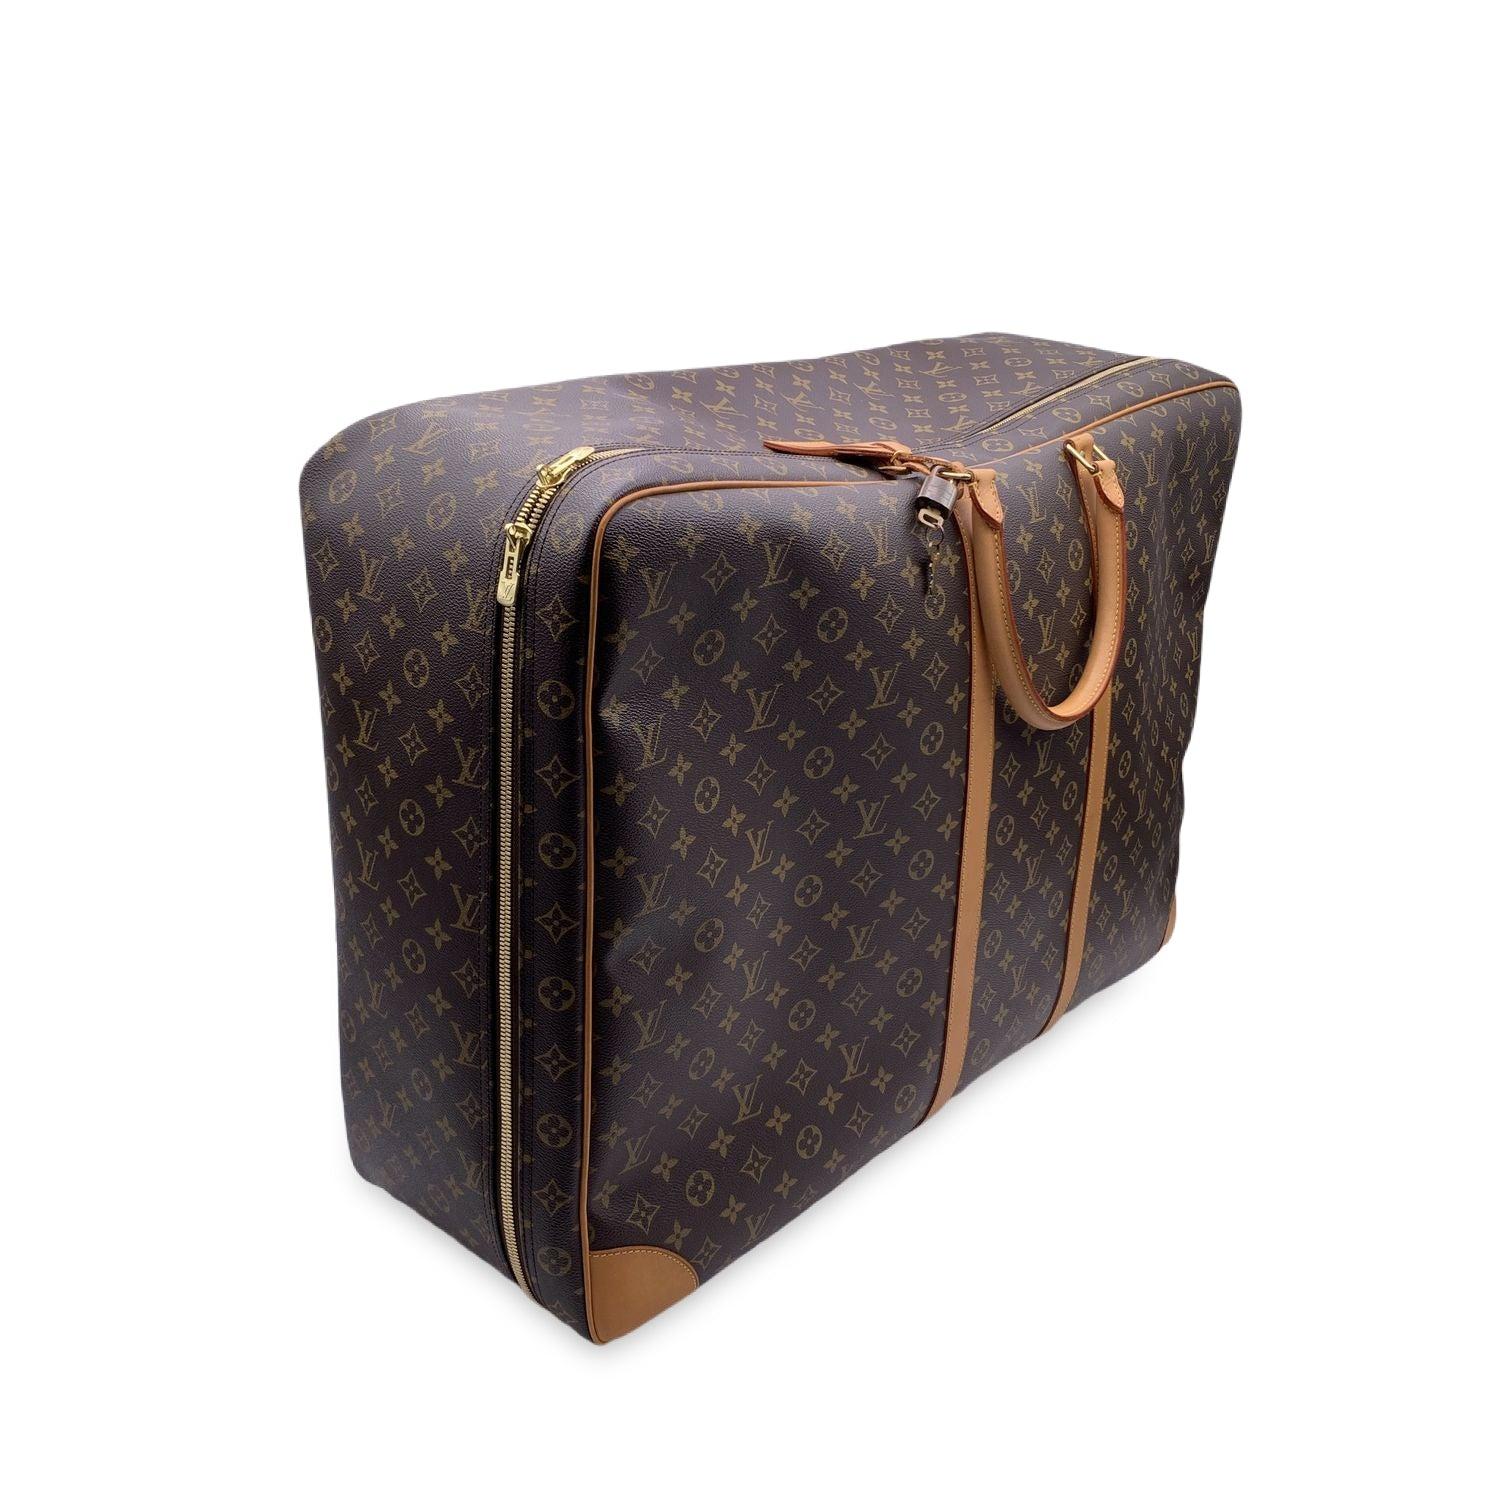 Splendid Louis Vuitton soft-sided SIRIUS 70 suitcase crafted in classic and timeless brown Monogram canvas. It features gold-tone hardware, natural cowhide leather trim and accents, double rolled leather handles and a full double zipper closure.